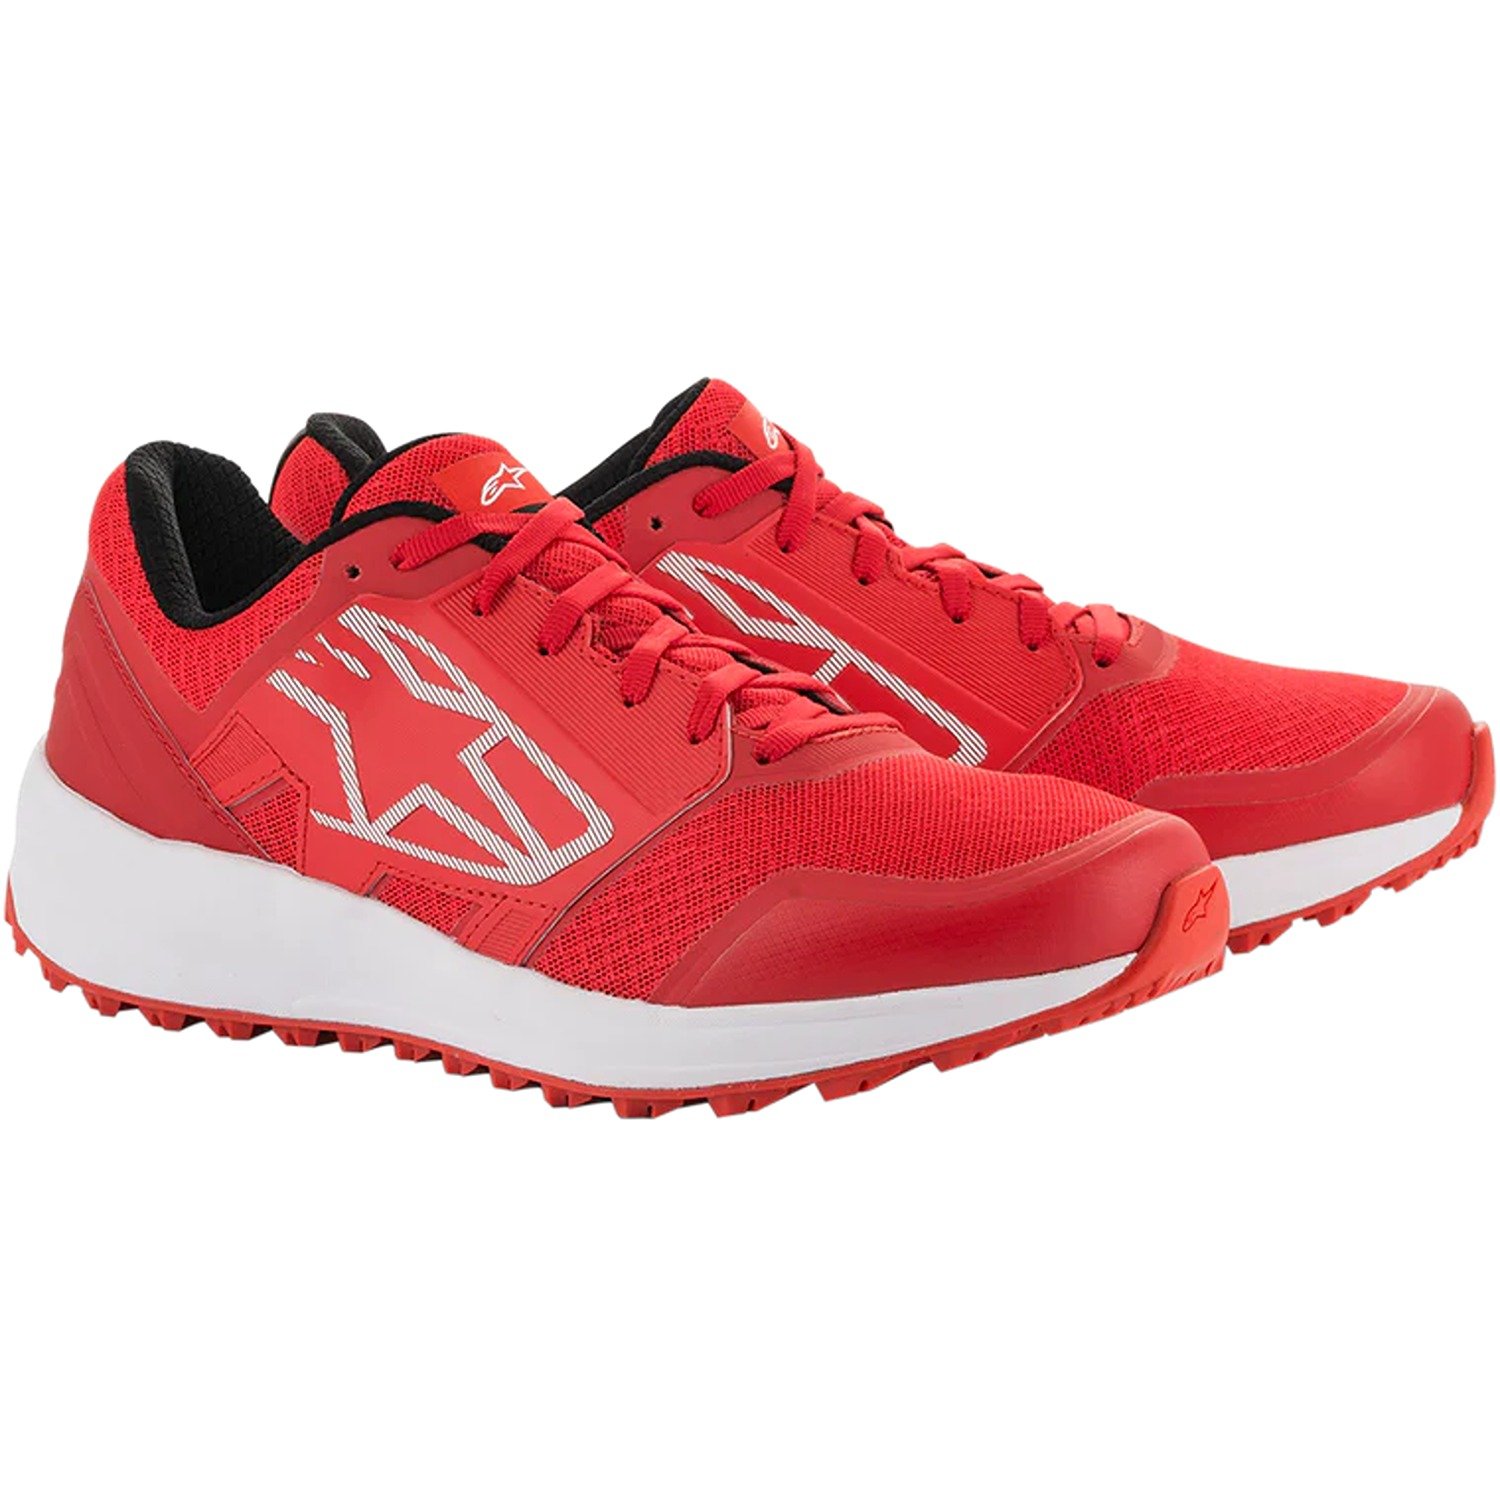 Image of Alpinestars Meta Trail Shoes Red White Size US 135 ID 8059175092190